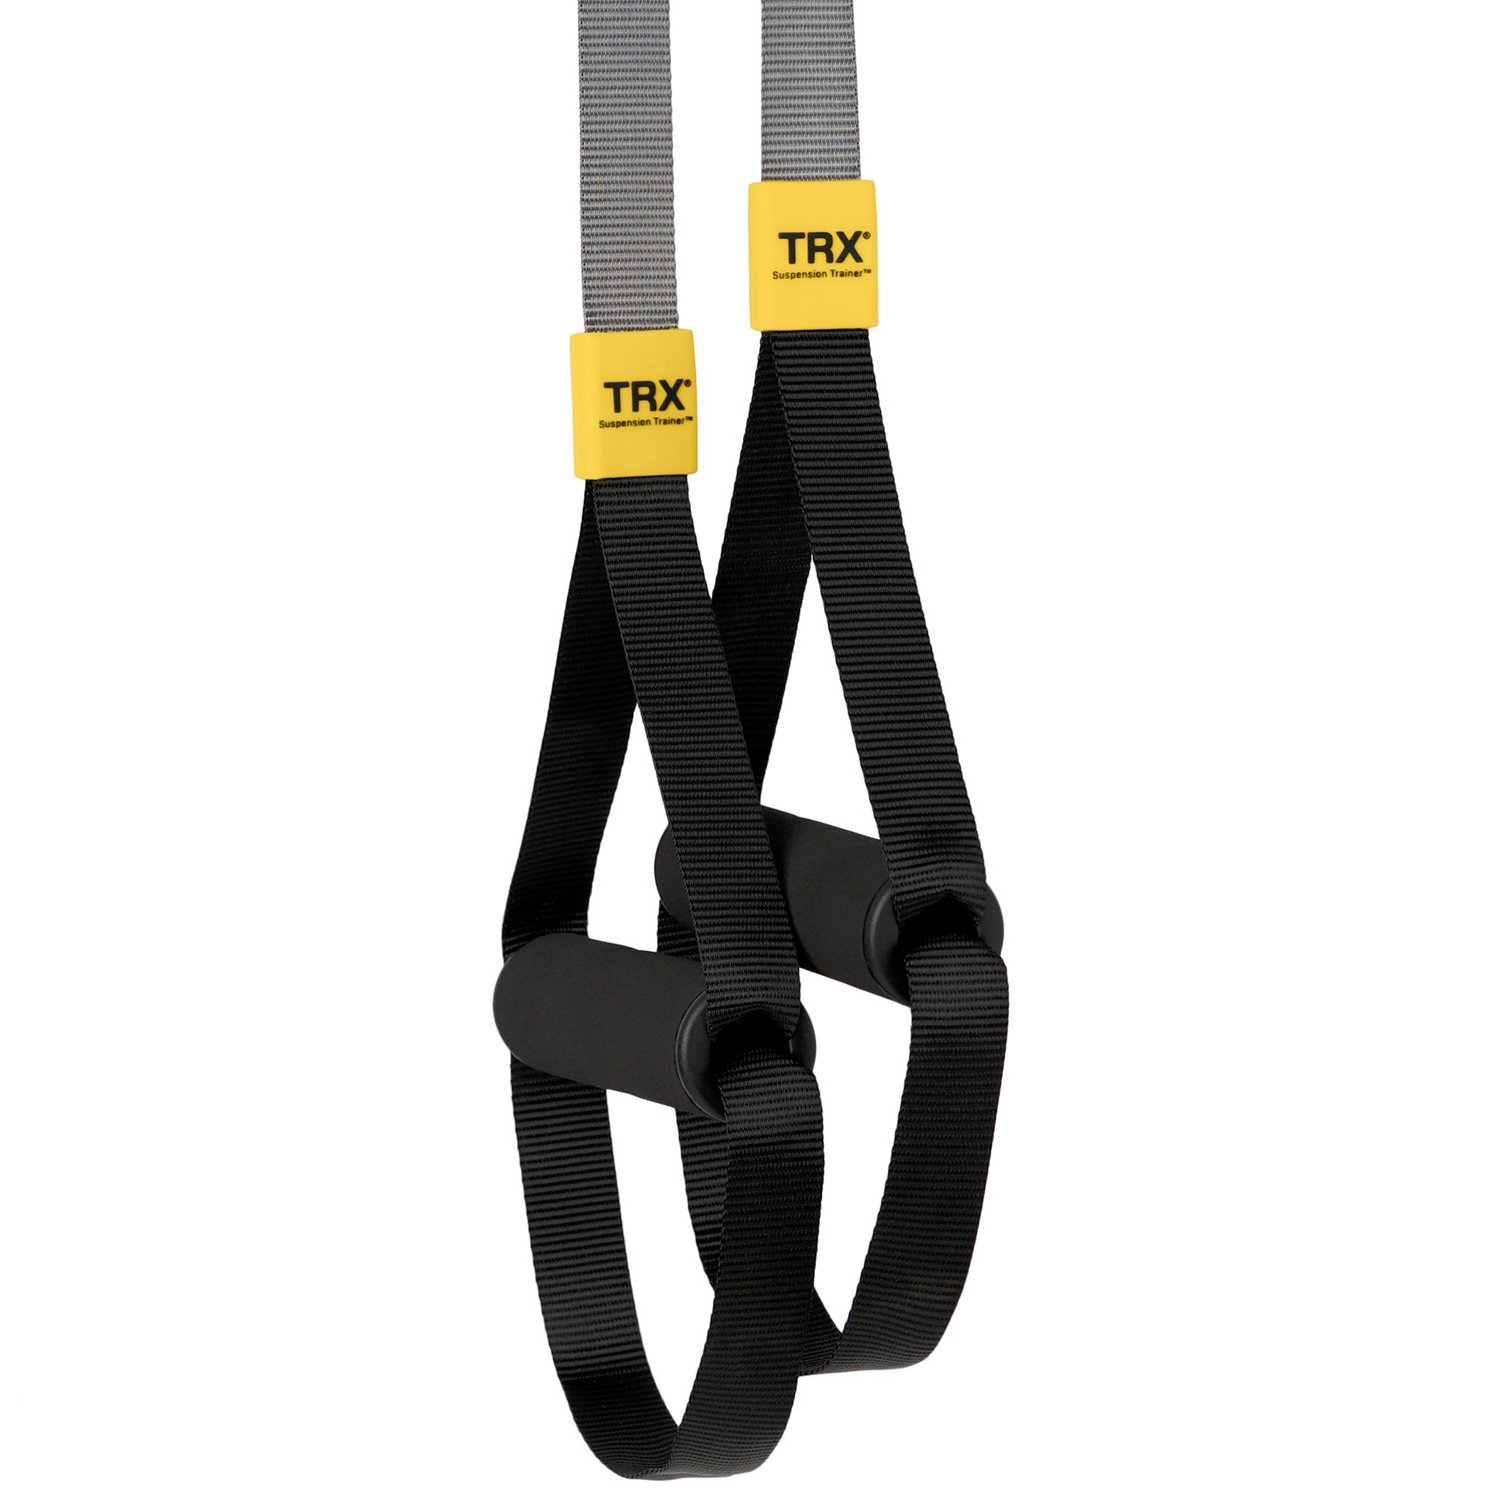 TRX All-in-One Suspension Trainer - Home-Gym System for the Seasoned Gym  Enthusiast, Includes TRX Training Club Access